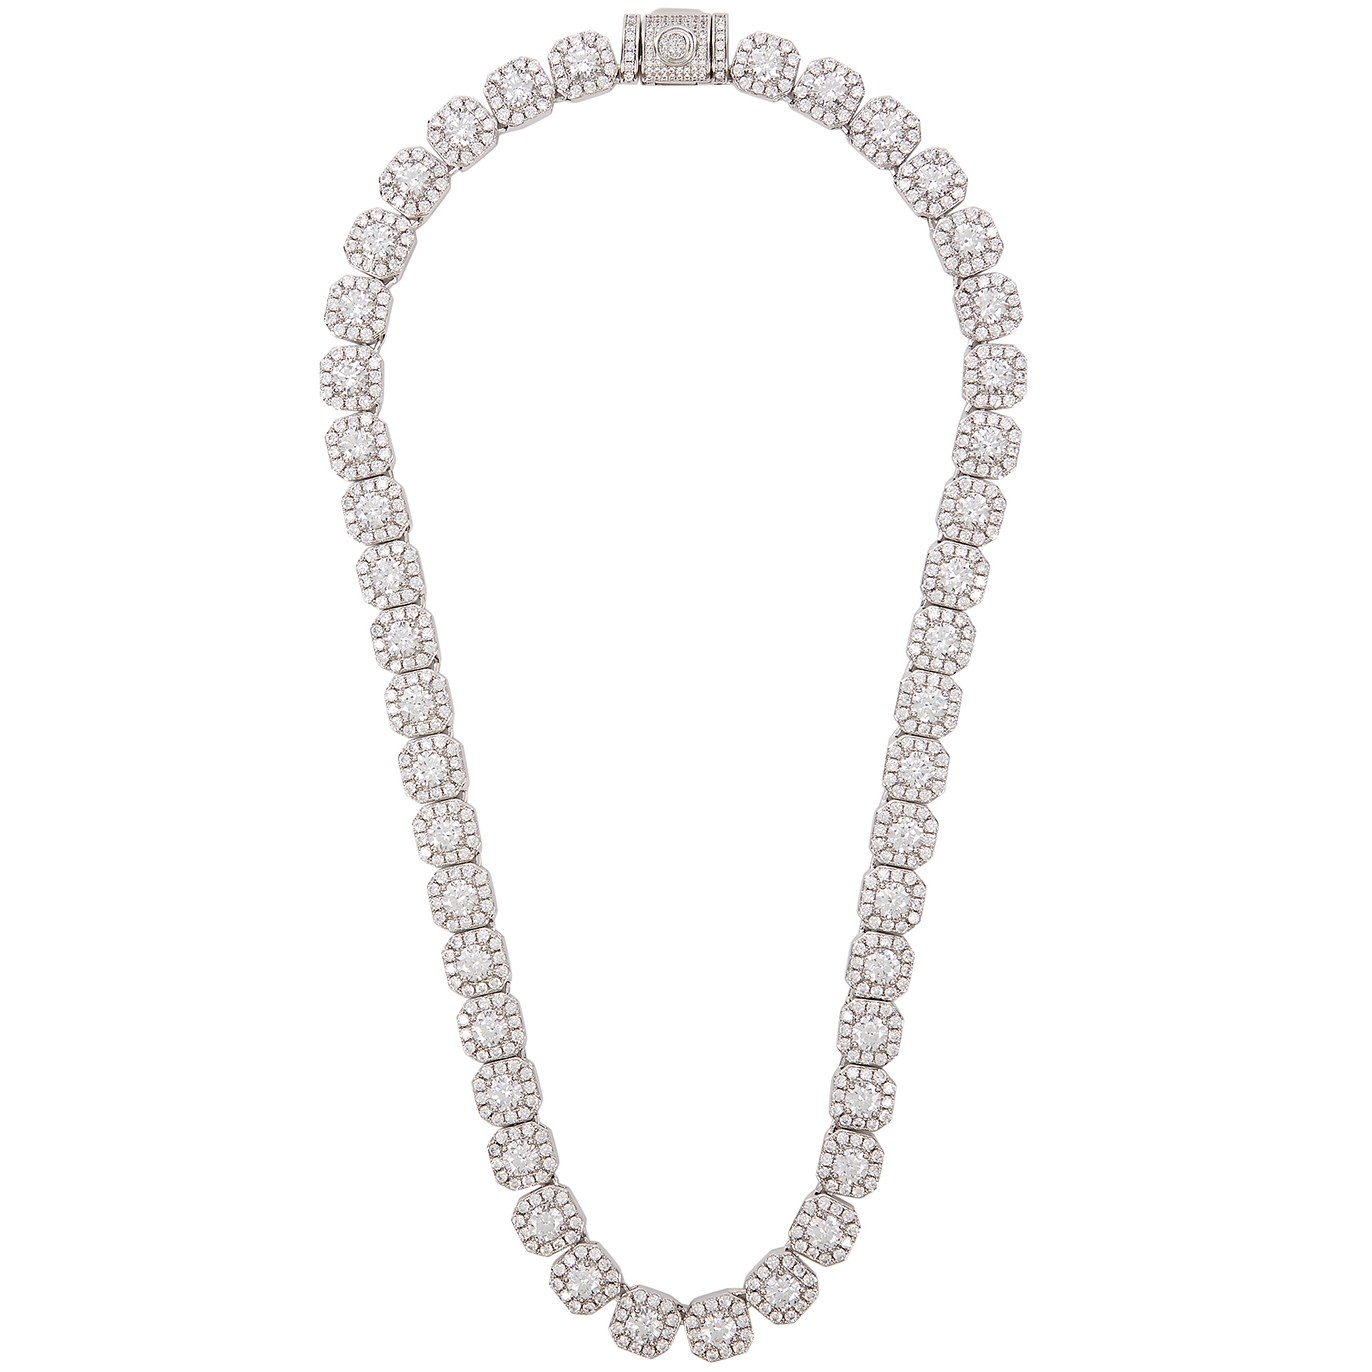 Clustered Tennis 18kt White Gold Necklace, Necklace, Silver